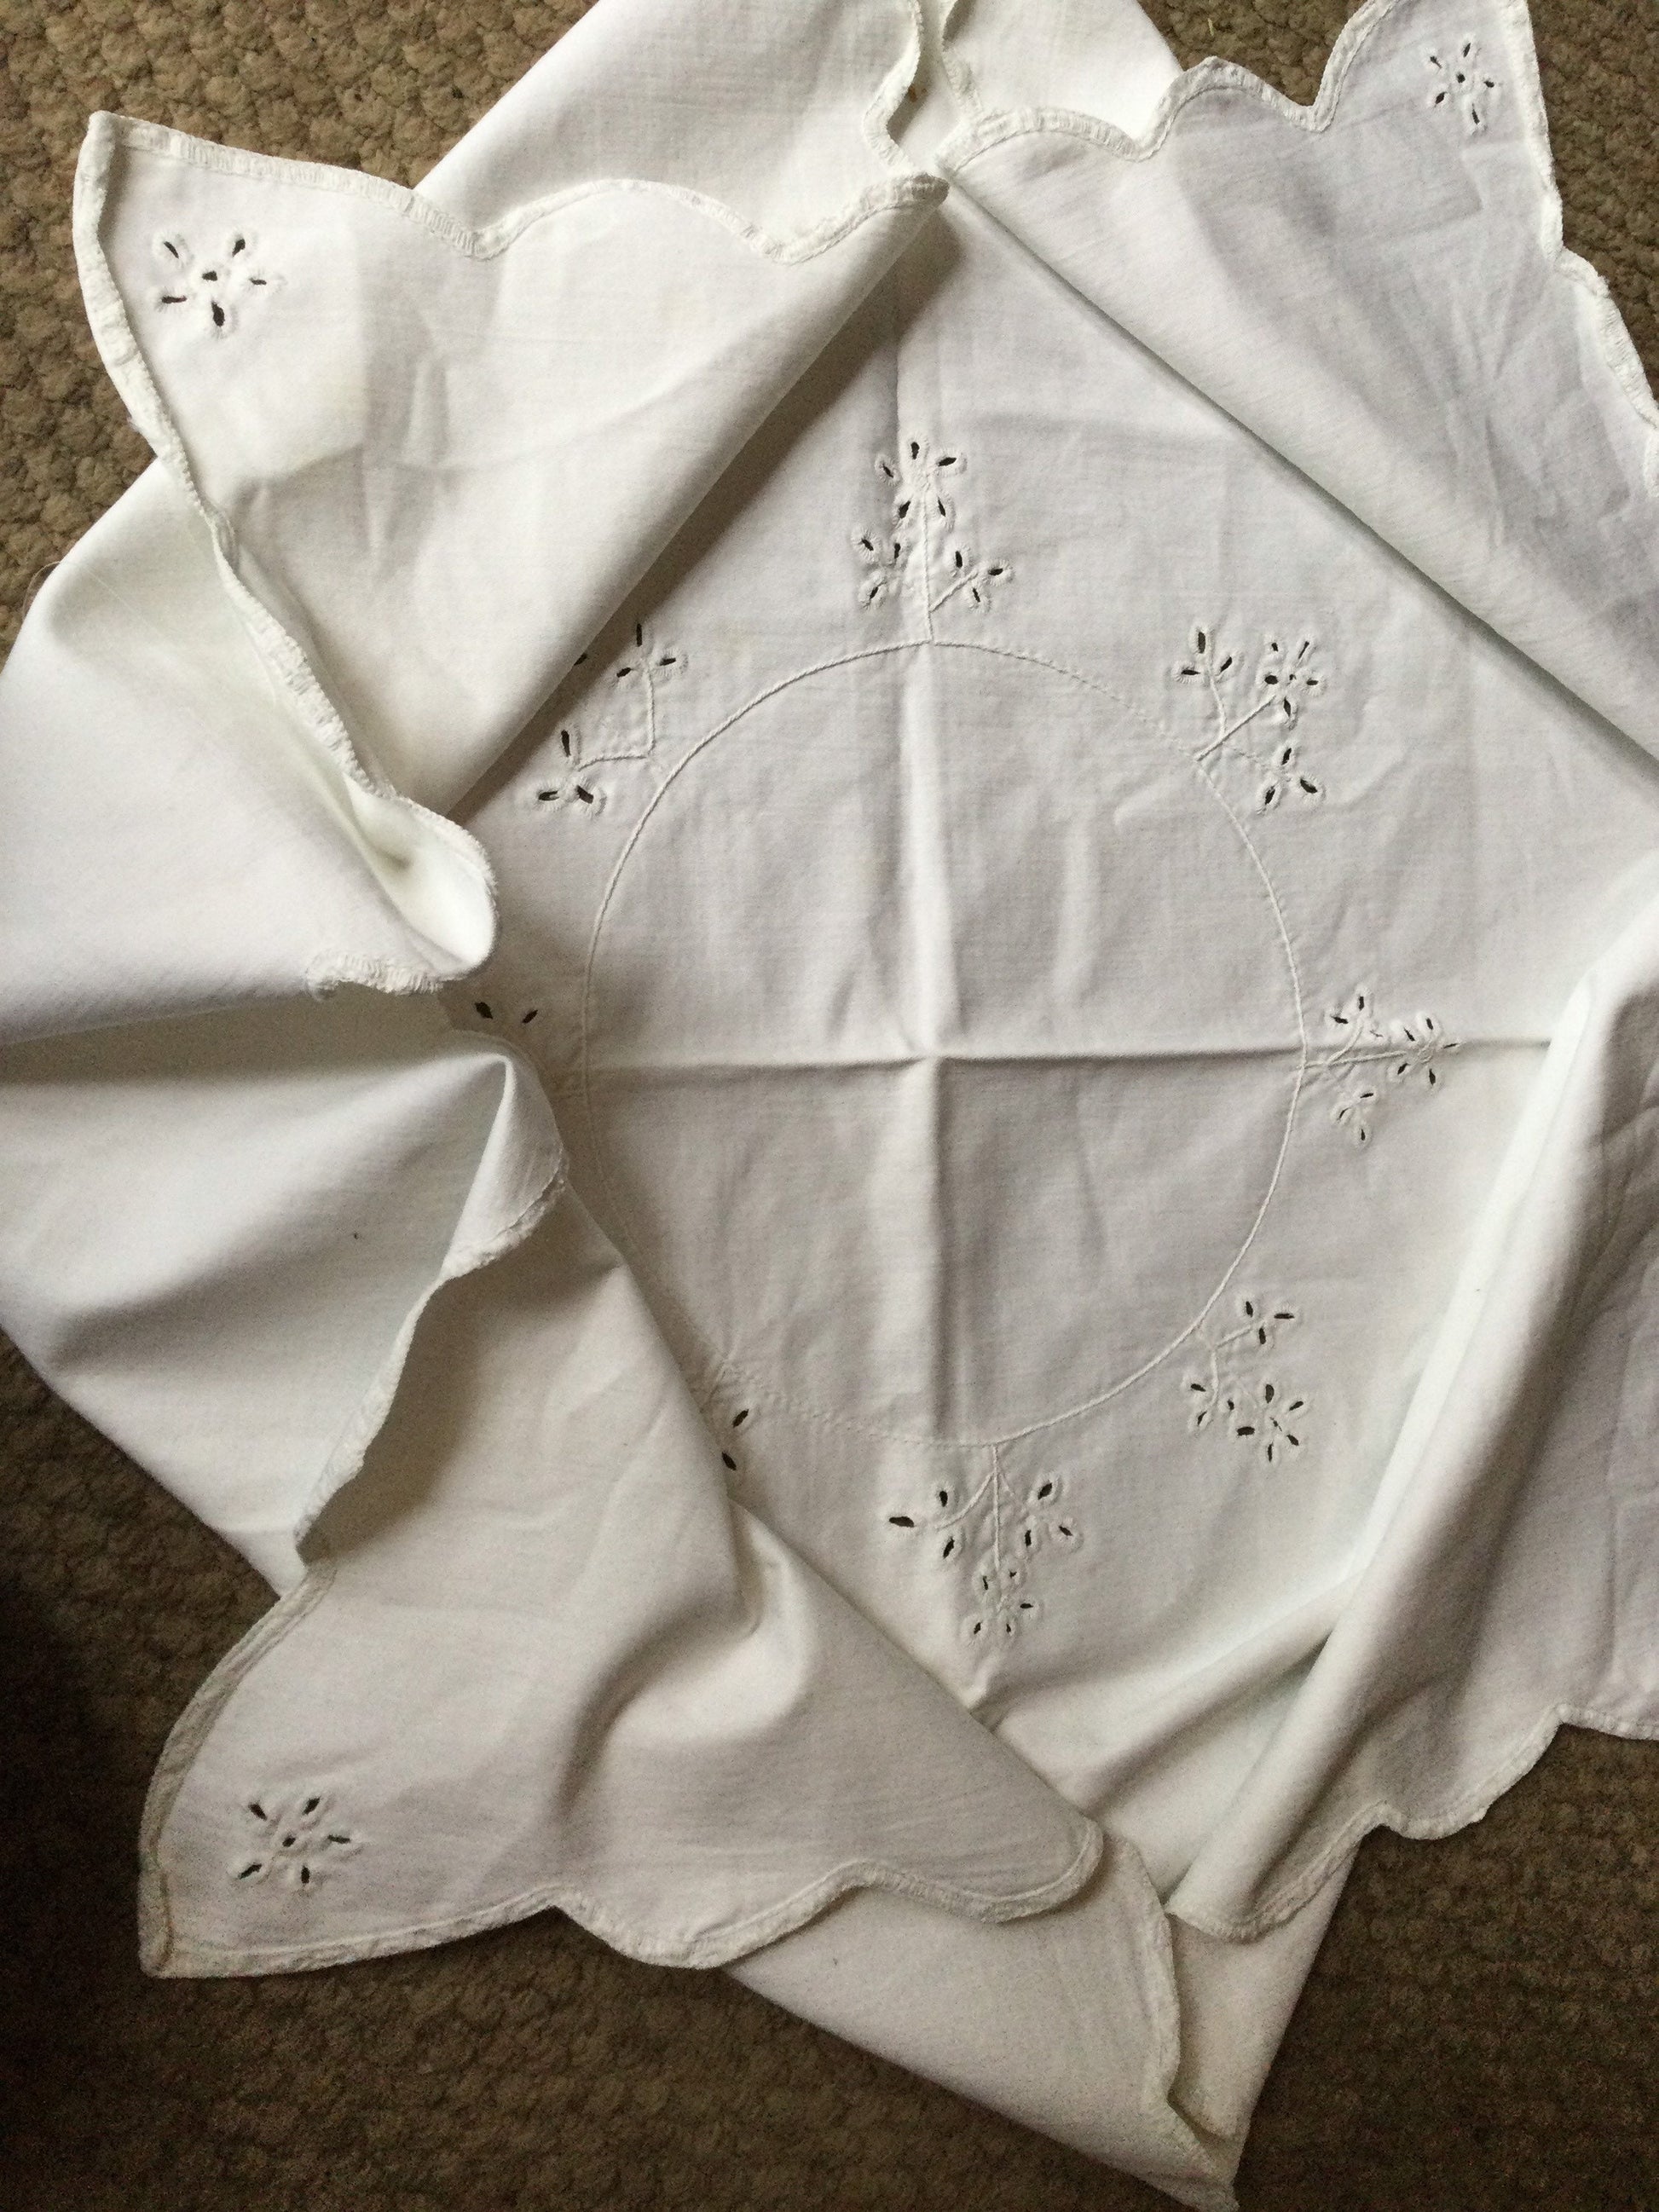 33” square Antique vintage heavy linen table cloth white square cut out embroidered floral tablecloth embroidery